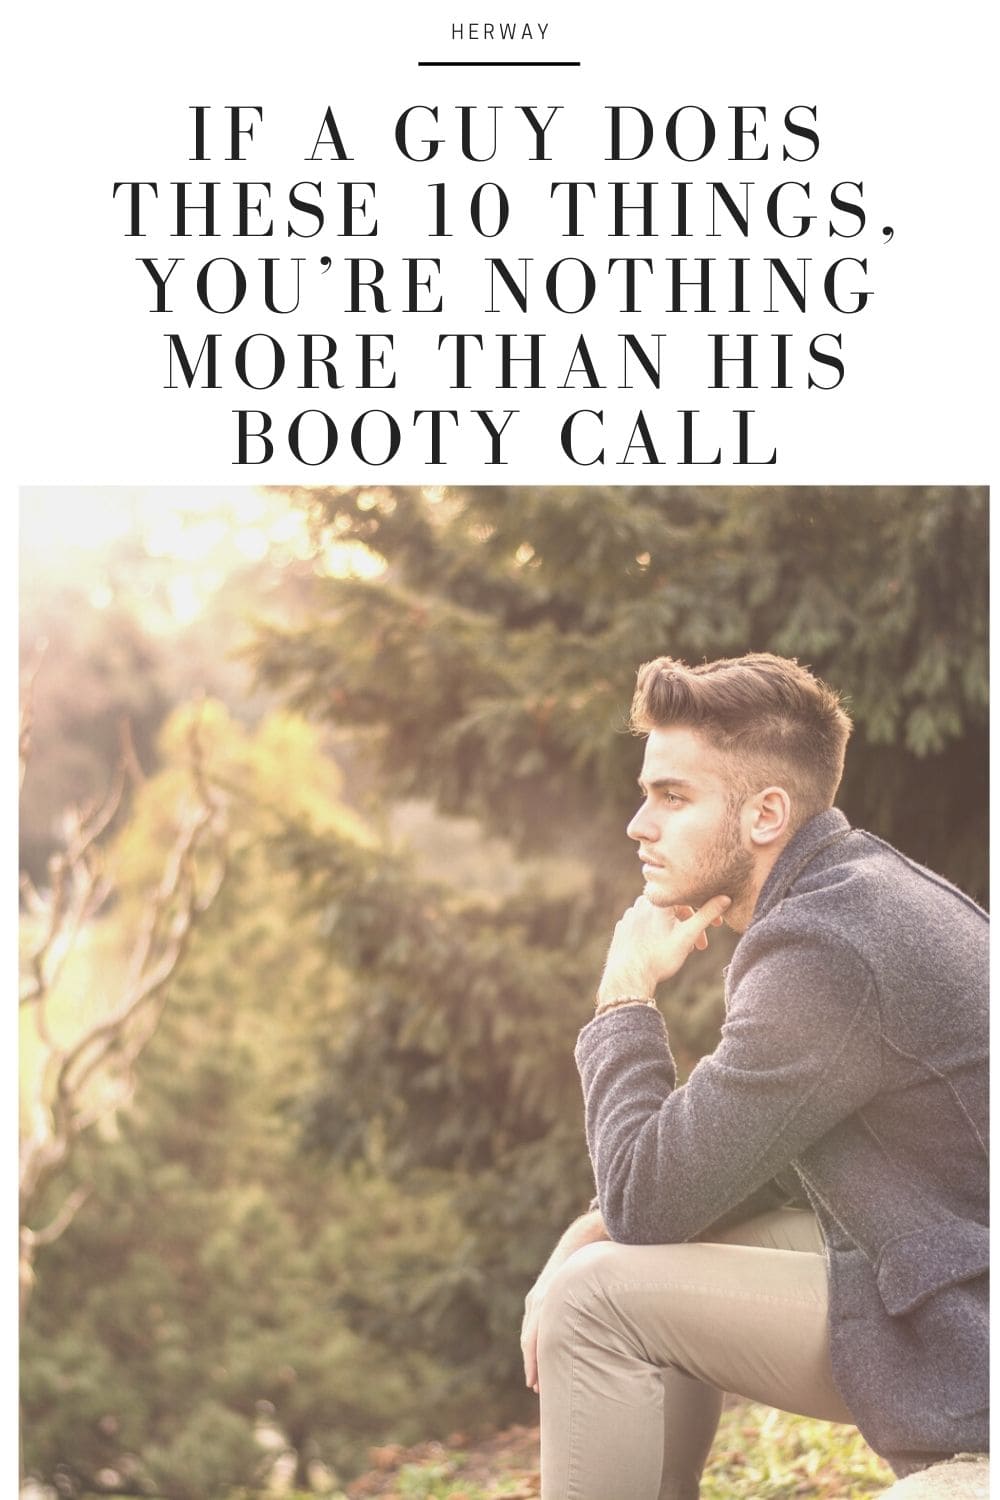 If A Guy Does These 10 Things, You’re Nothing More Than His Booty Call